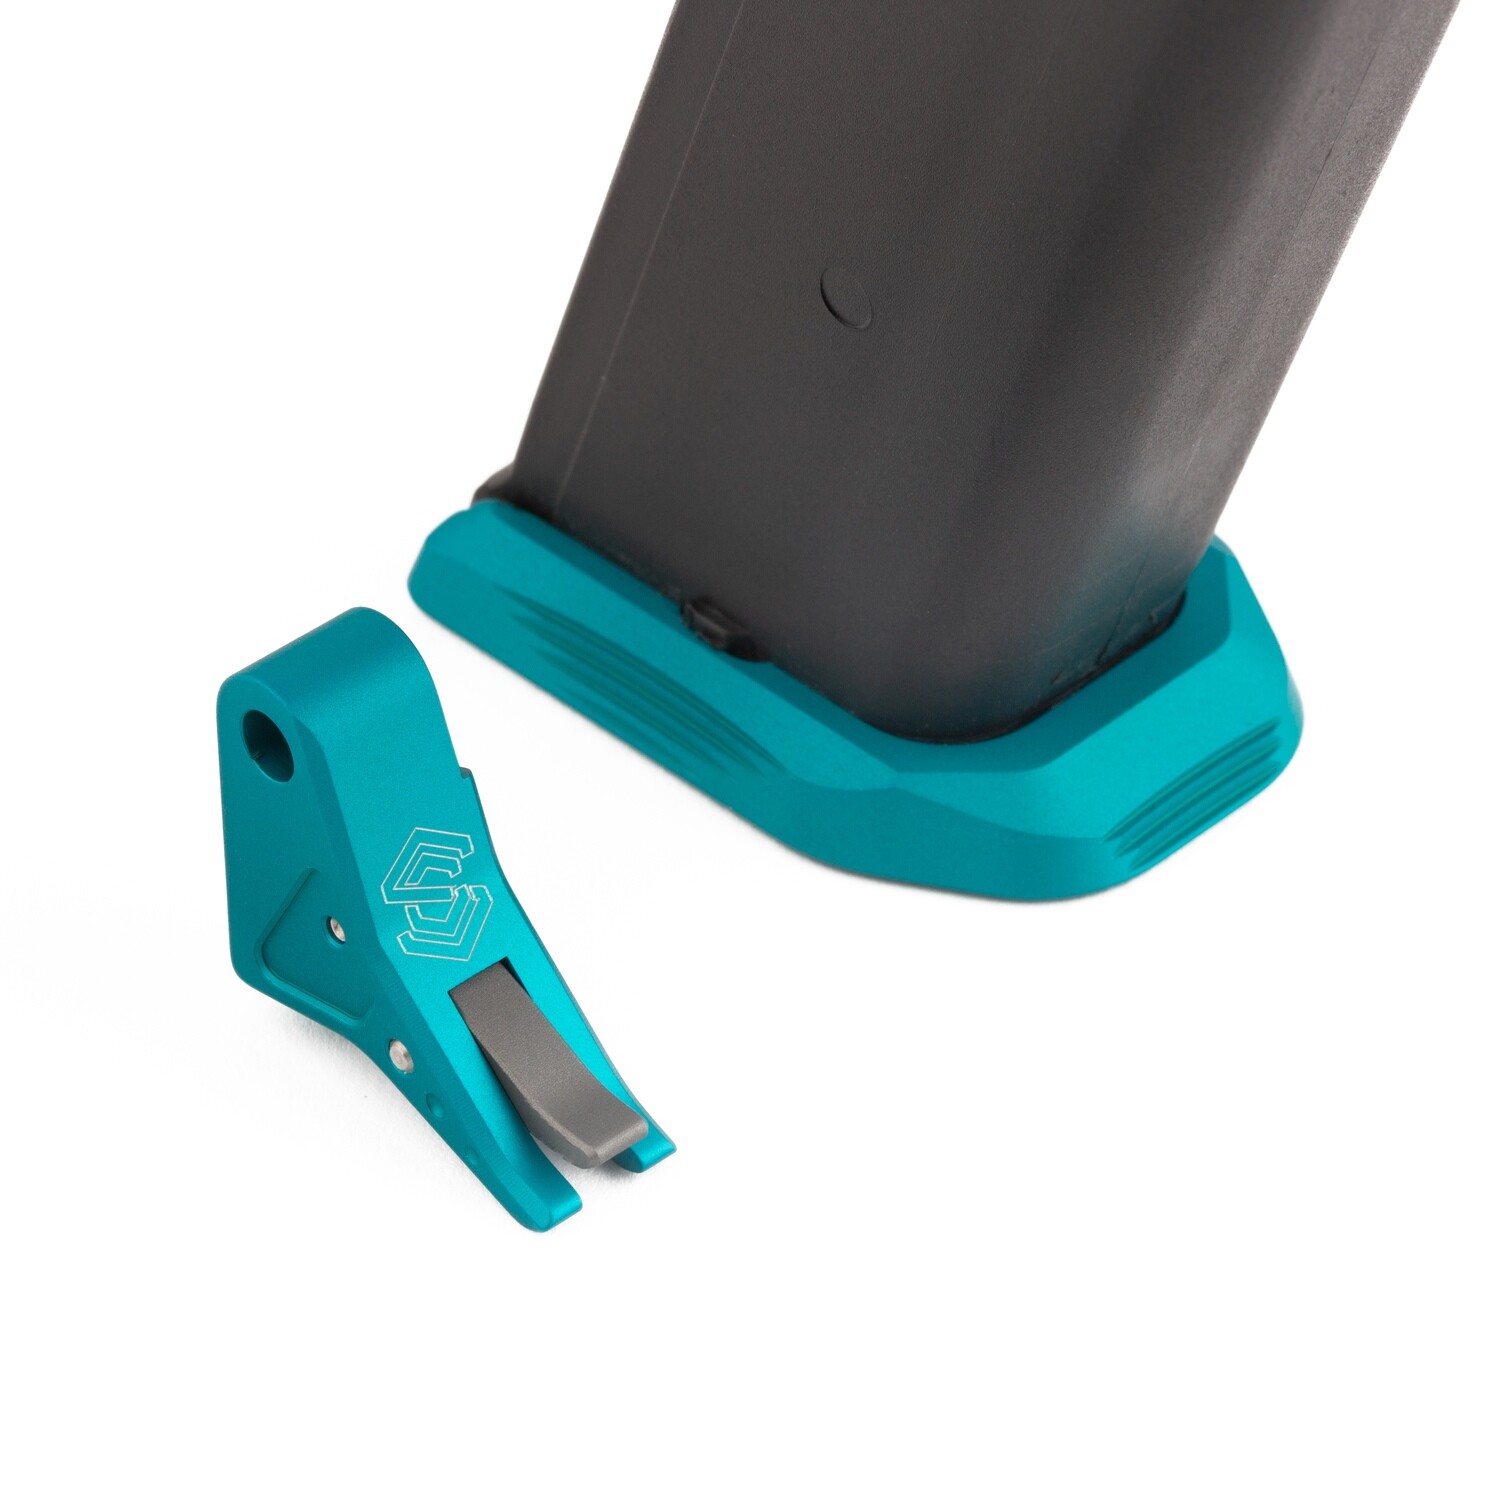 "SAGISI SQUEEZY" Trigger/Basepad Combo (Teal Shoe/Grey Safety)